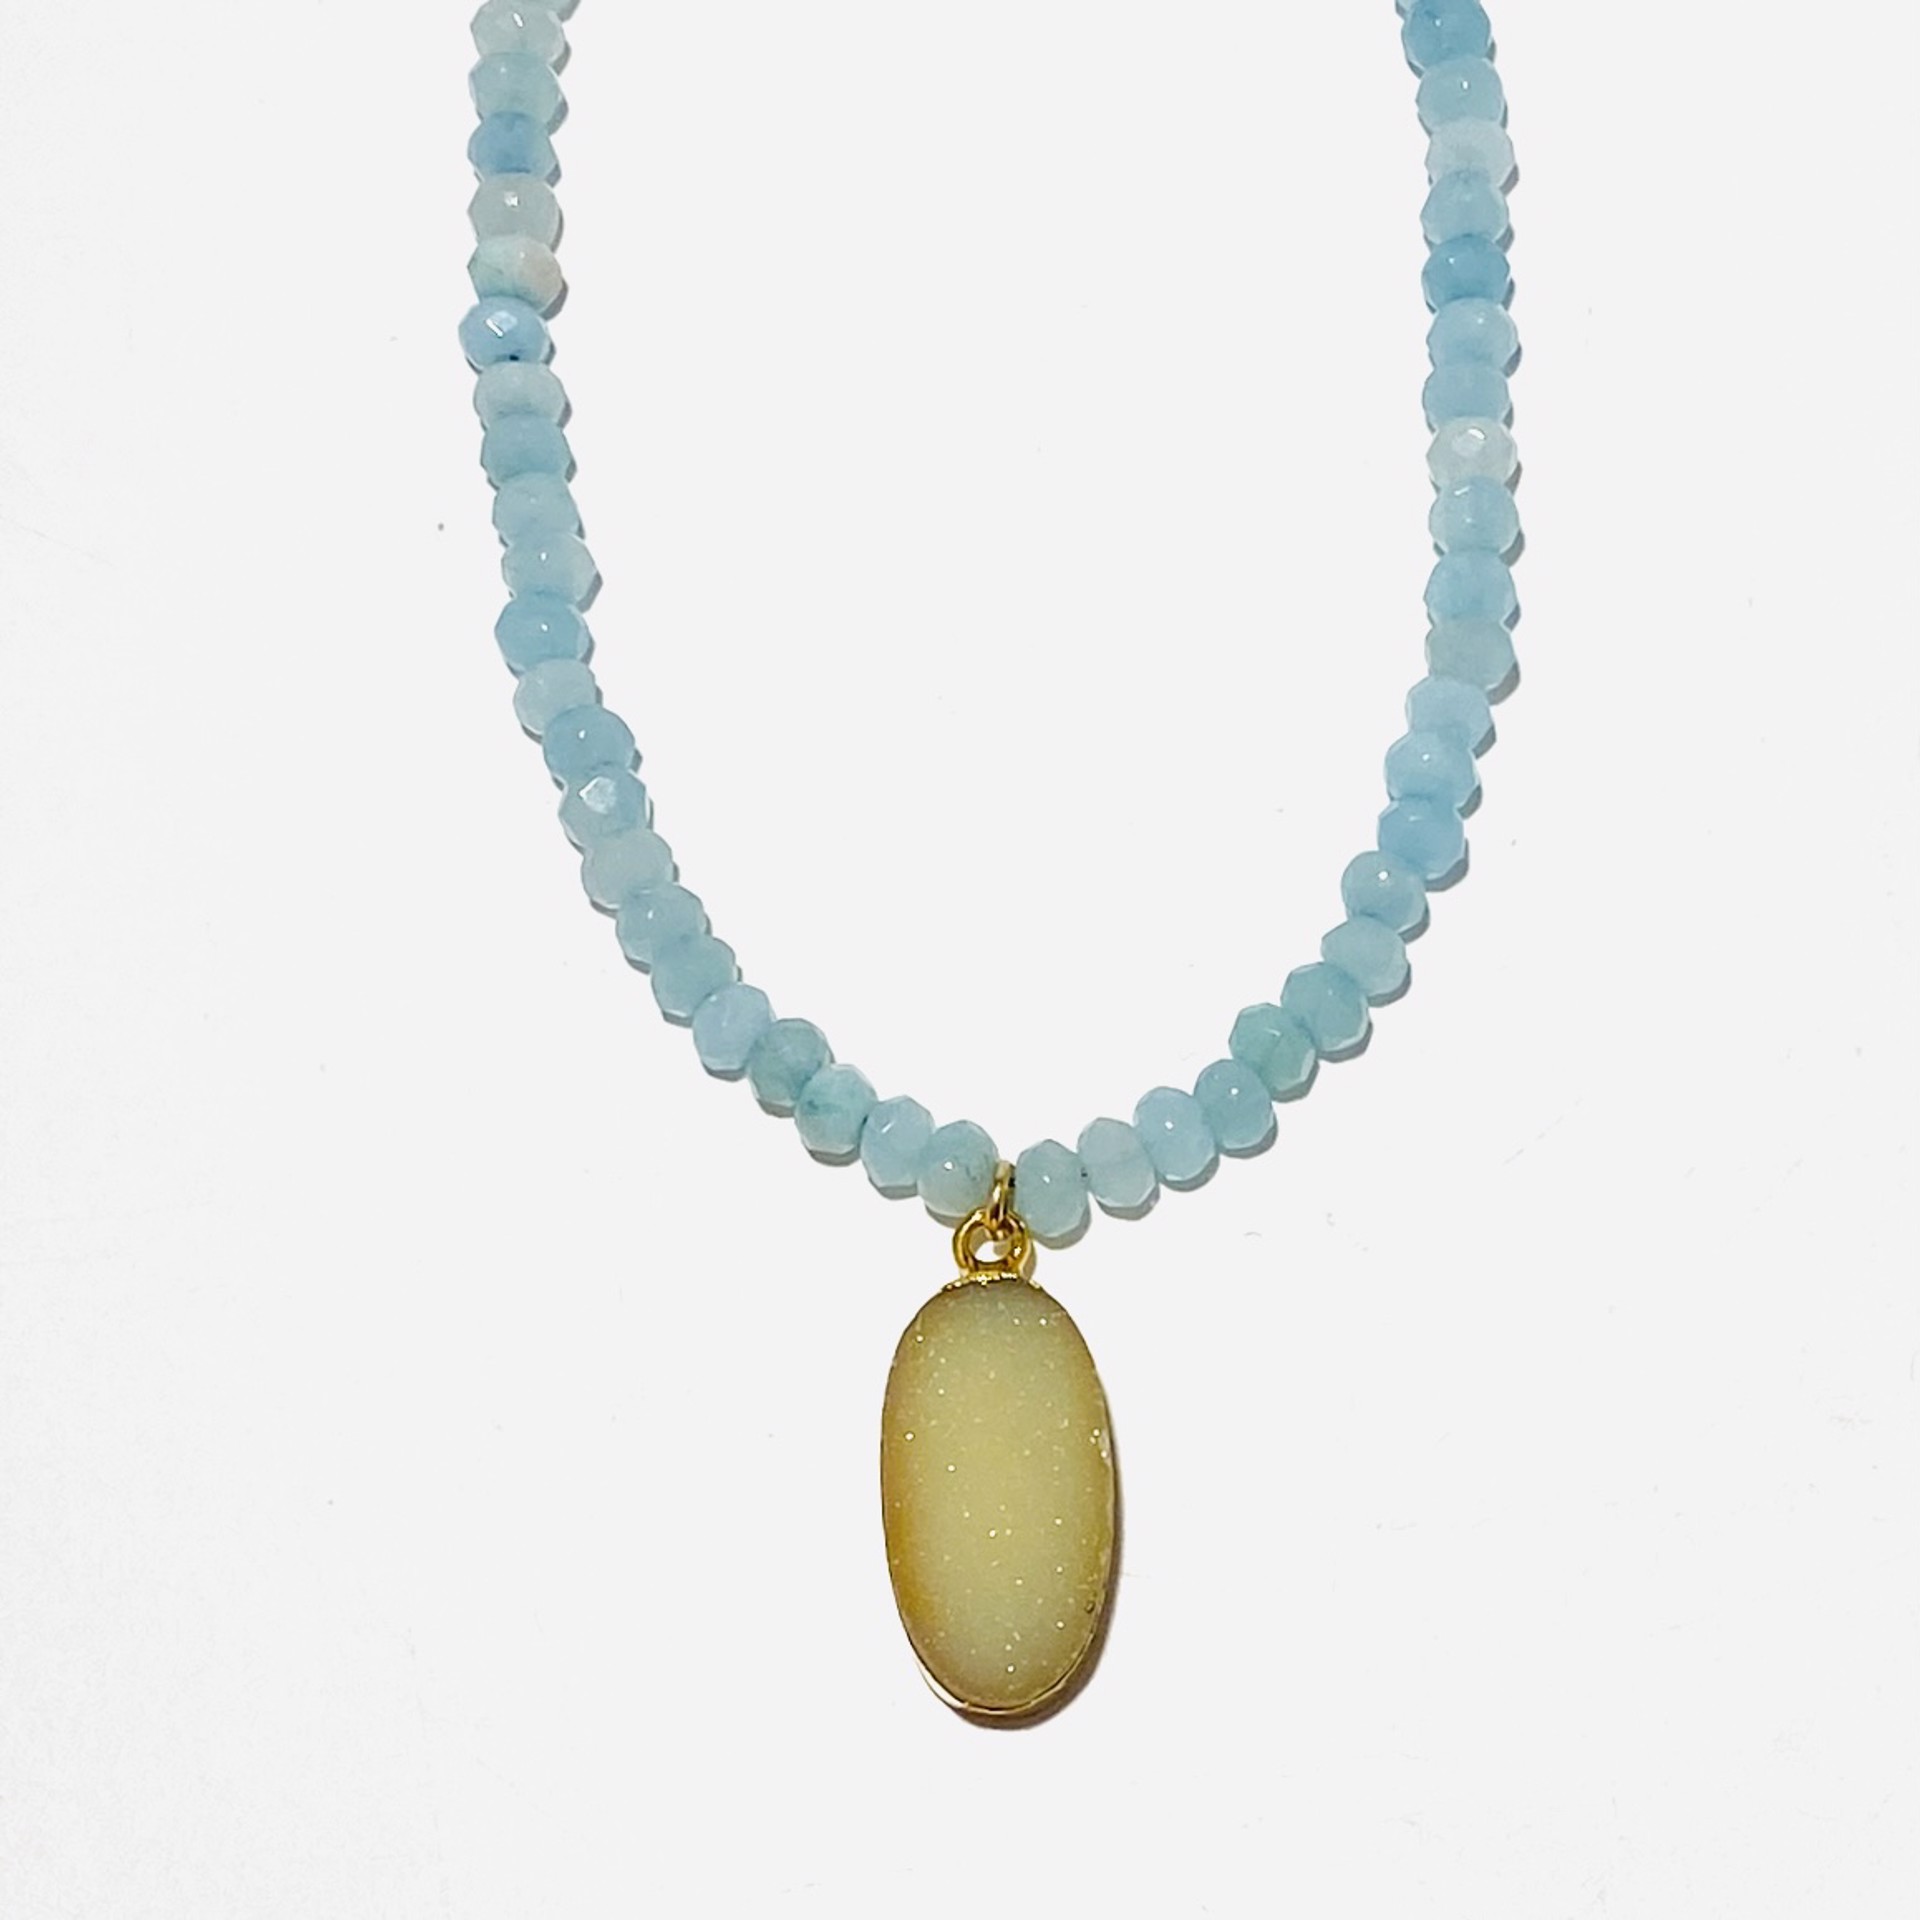 Faceted Aqua Jade Oval Yellow Druzy Necklace by Nance Trueworthy